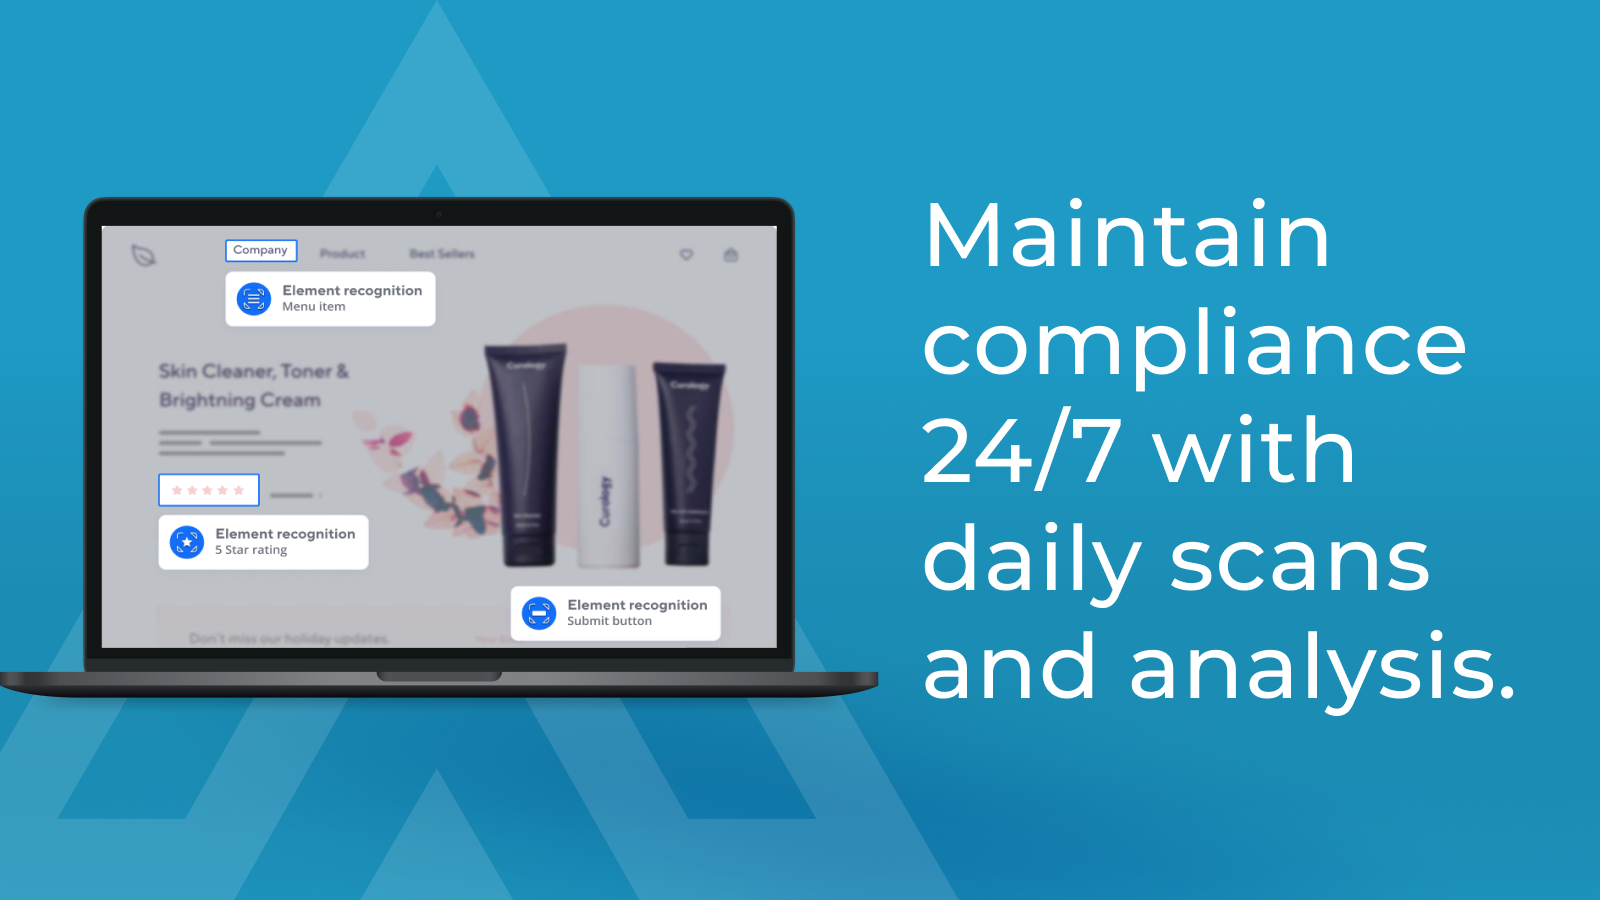 Maintain compliance 24/7 with daily scans and analysis.